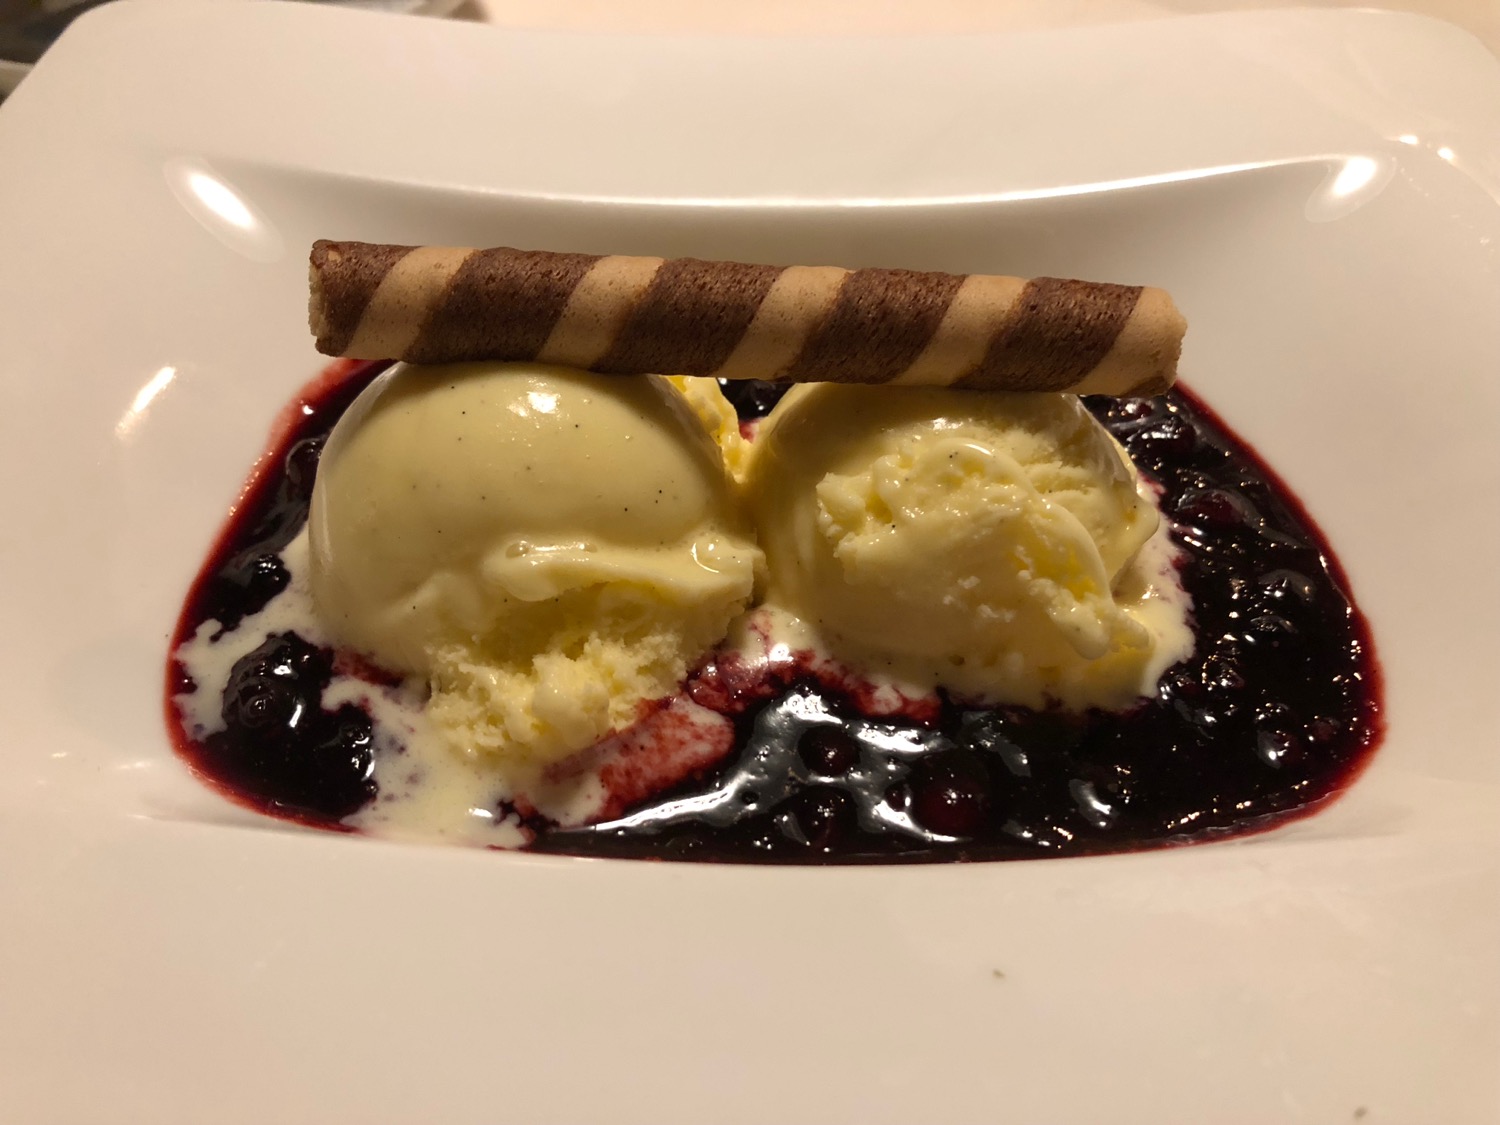 a plate of ice cream and sauce